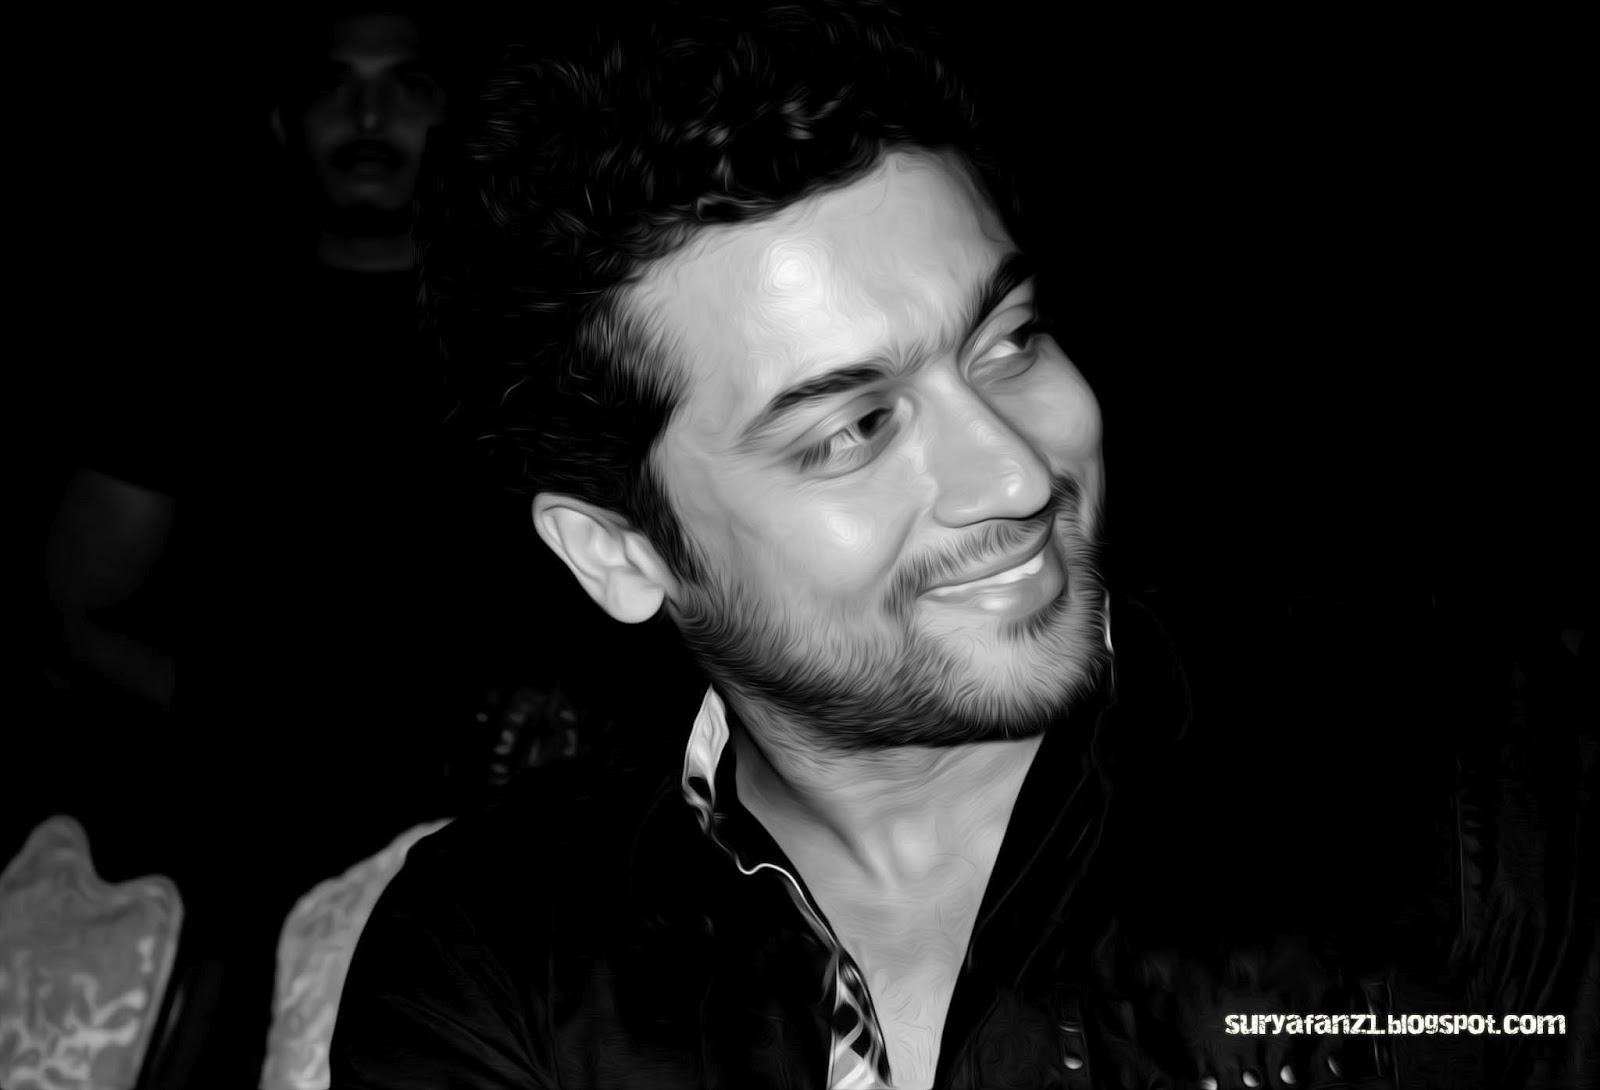 Background Pic Of Surya Wallpaper Image New